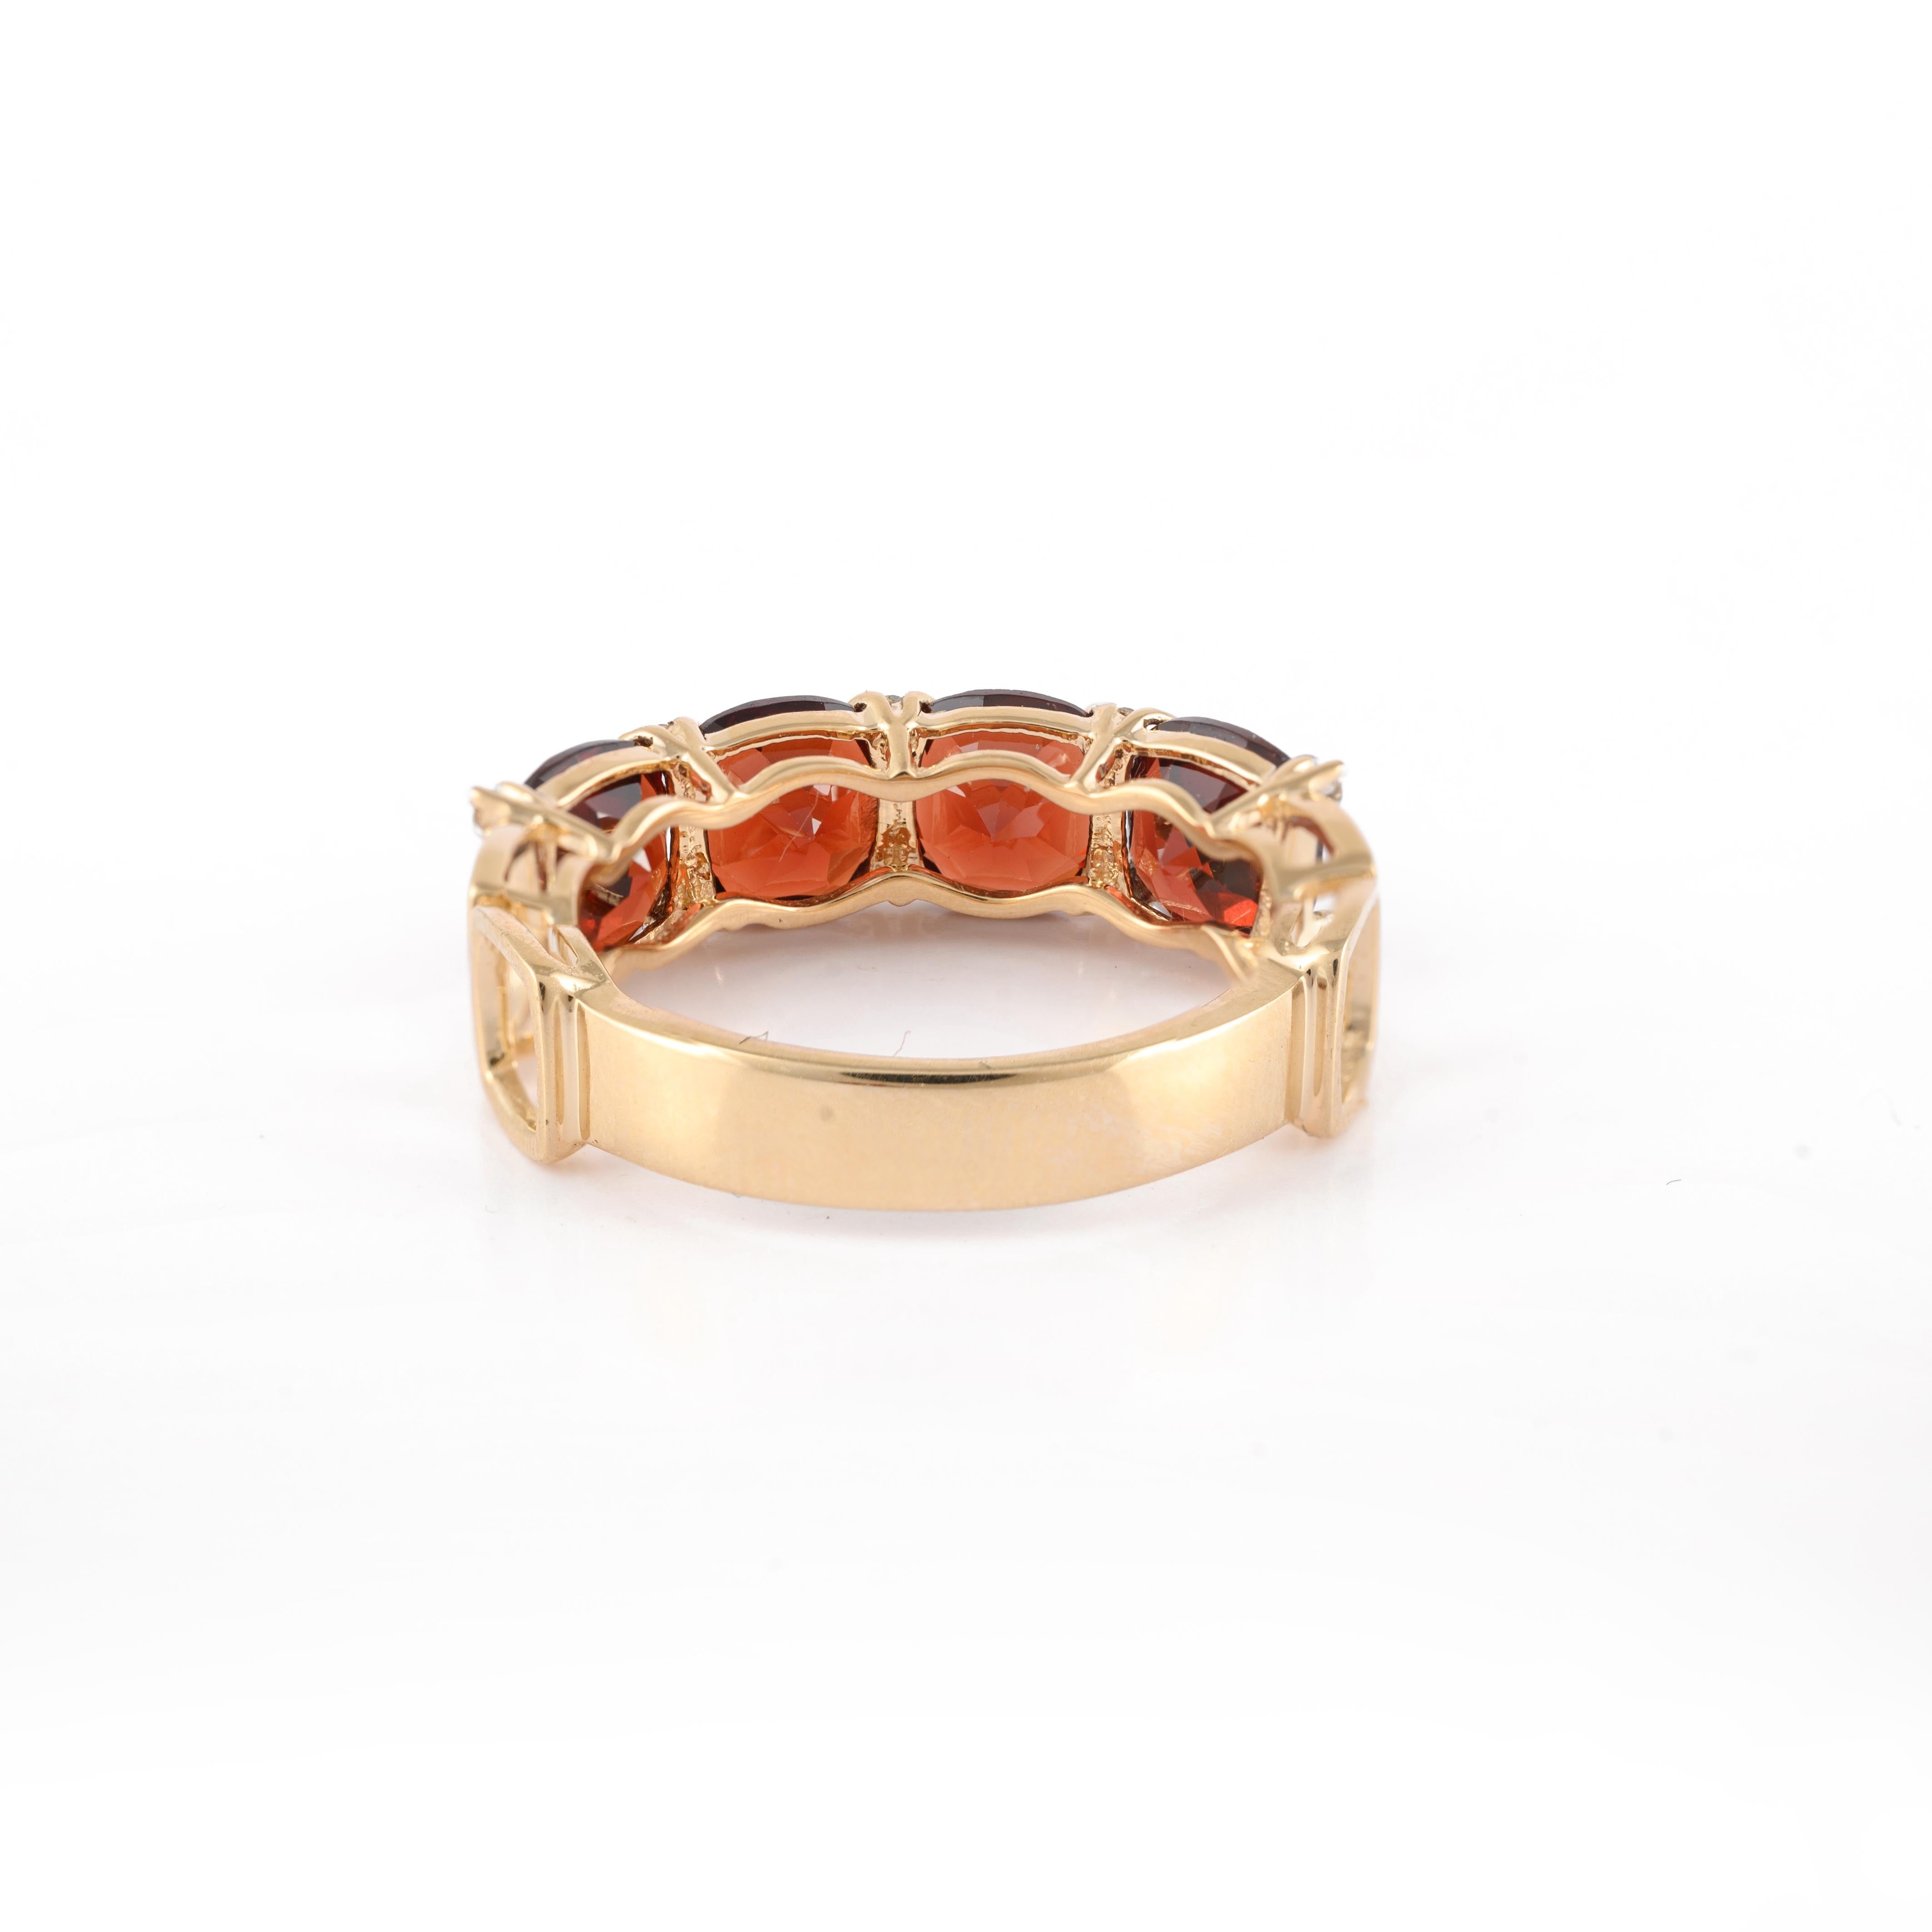 For Sale:  14k Solid Yellow Gold Natural 4.75 Carat Garnet Ring with Diamonds for Her 5